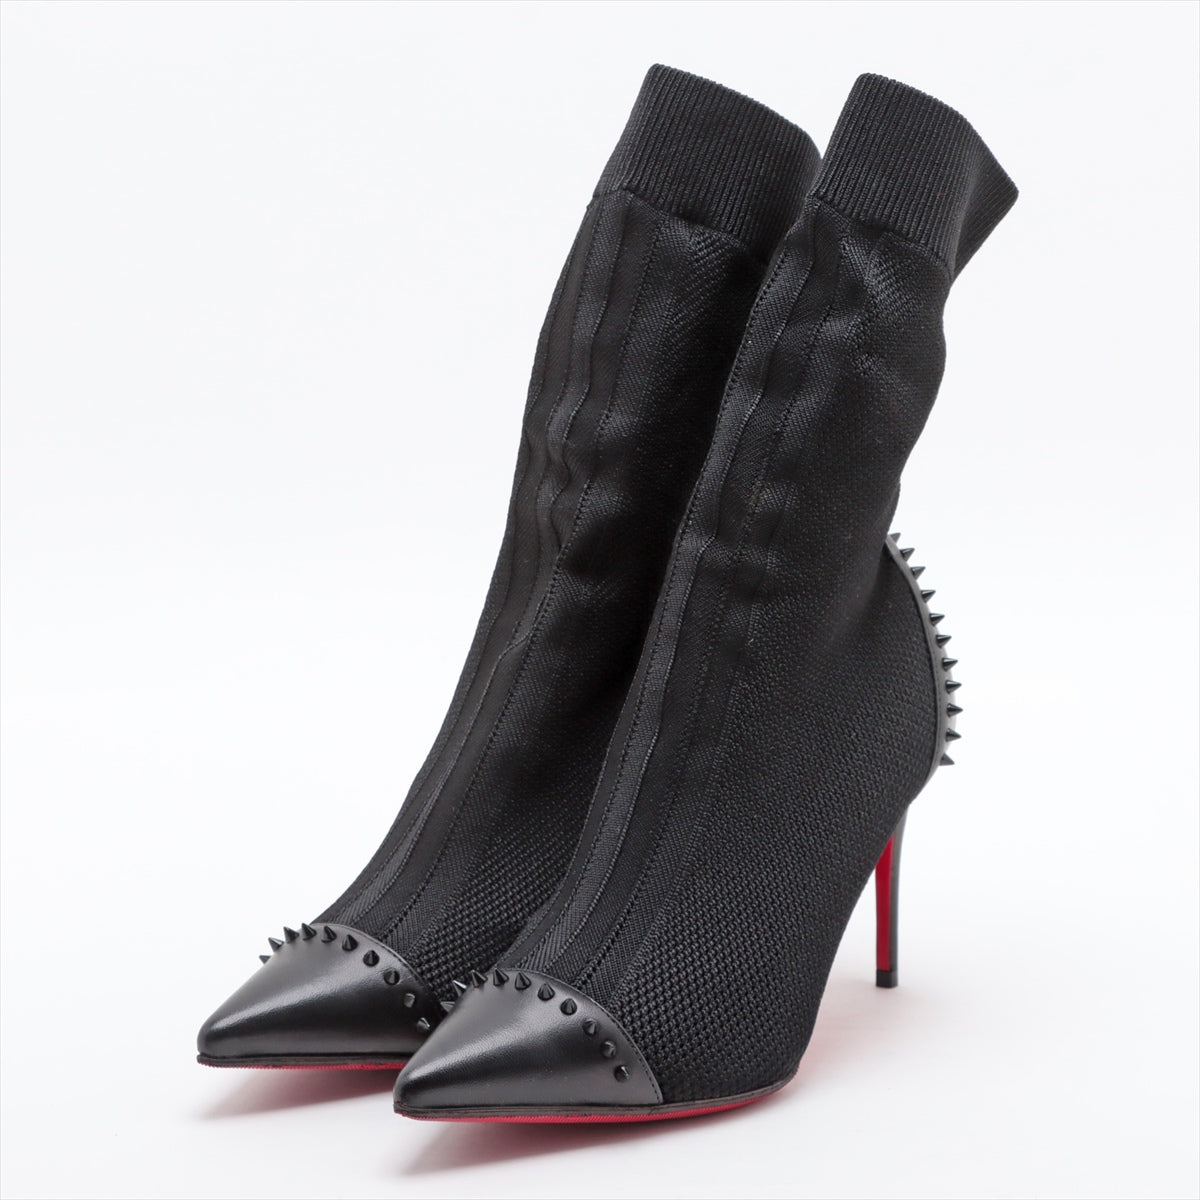 Christian Louboutin Leather x fabric Short Boots 36 Ladies' Black Spike Studs SOCK BOOTS